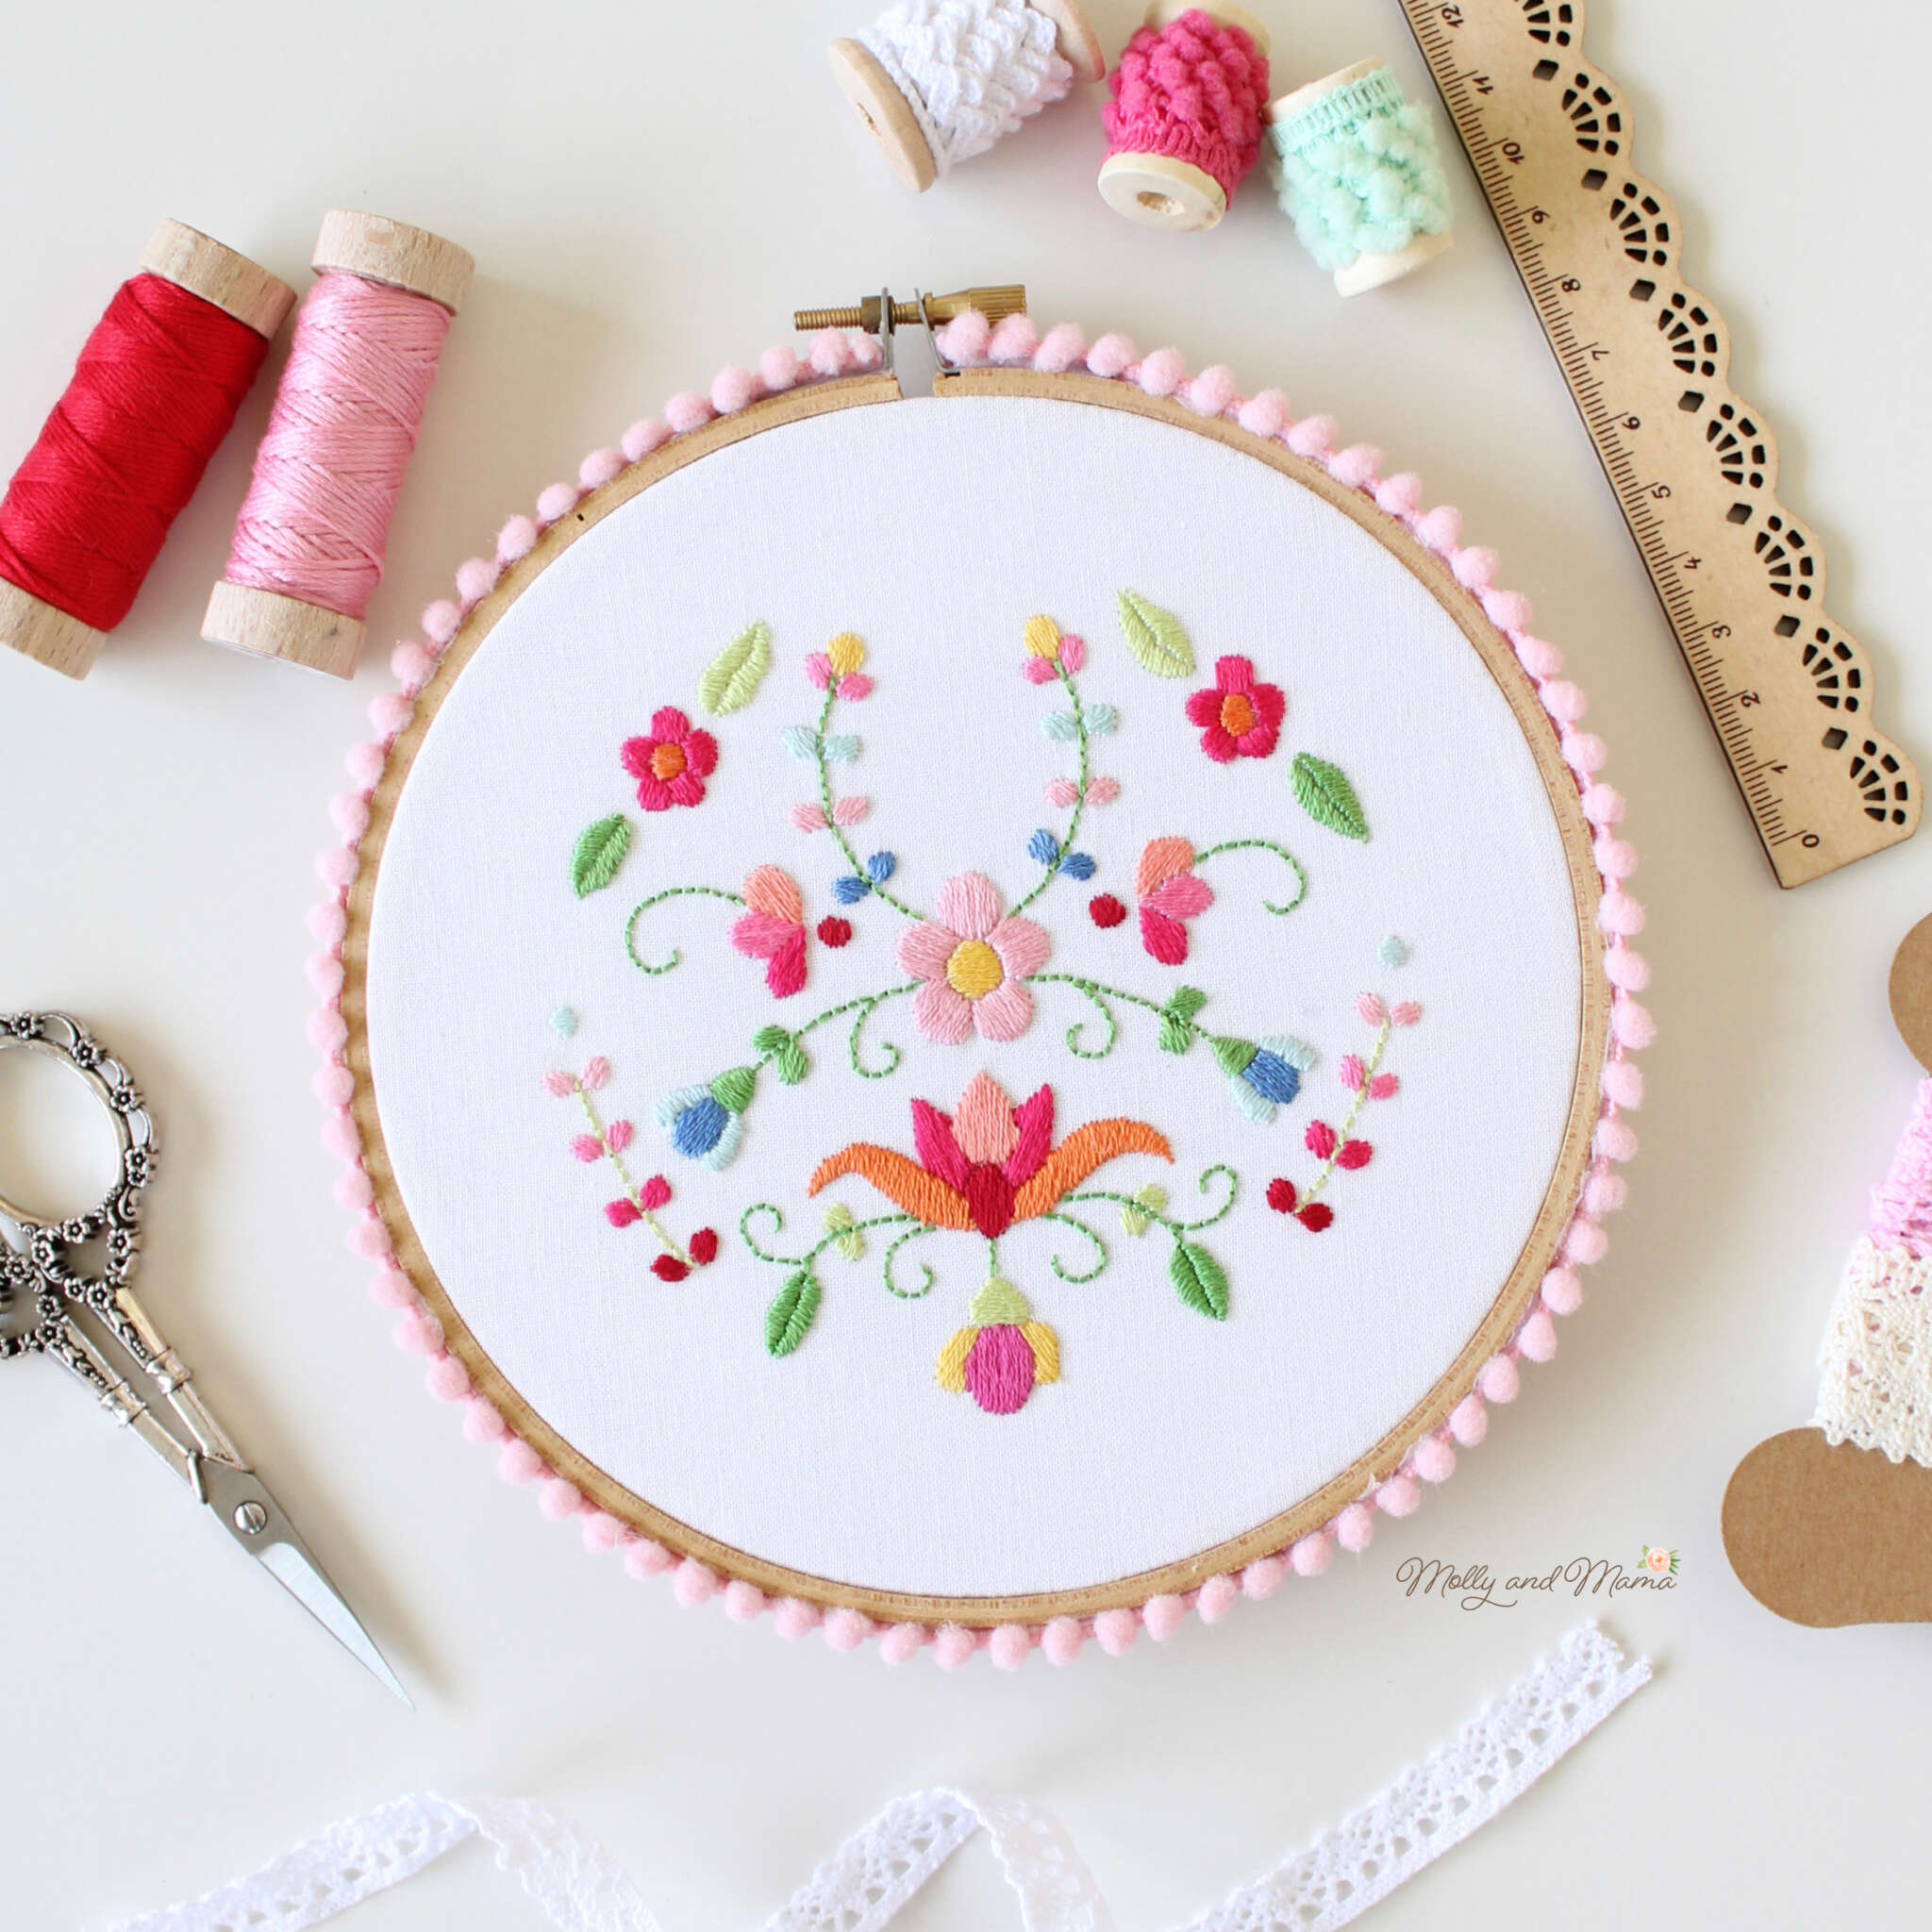 How to Display Embroidery Projects